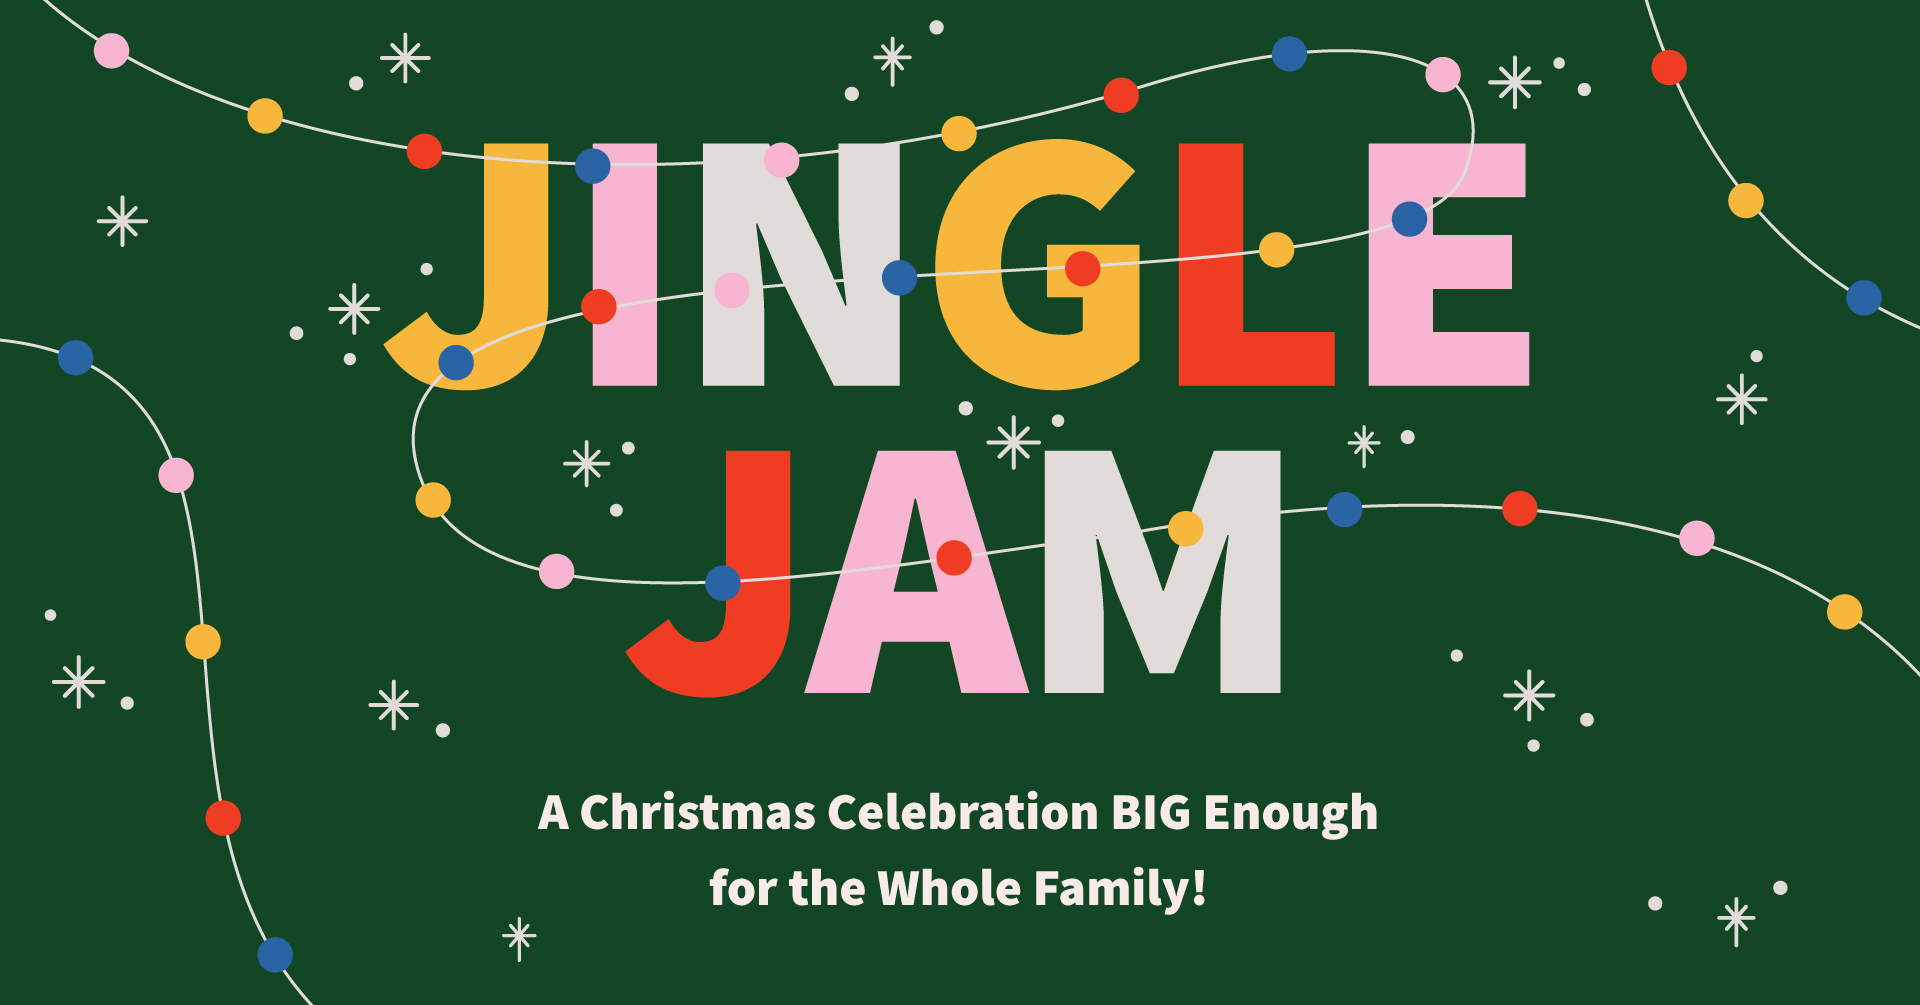 graphic: green invitation with colored lights and colored words "jingle jam." colors are pink, yellow, red and white.